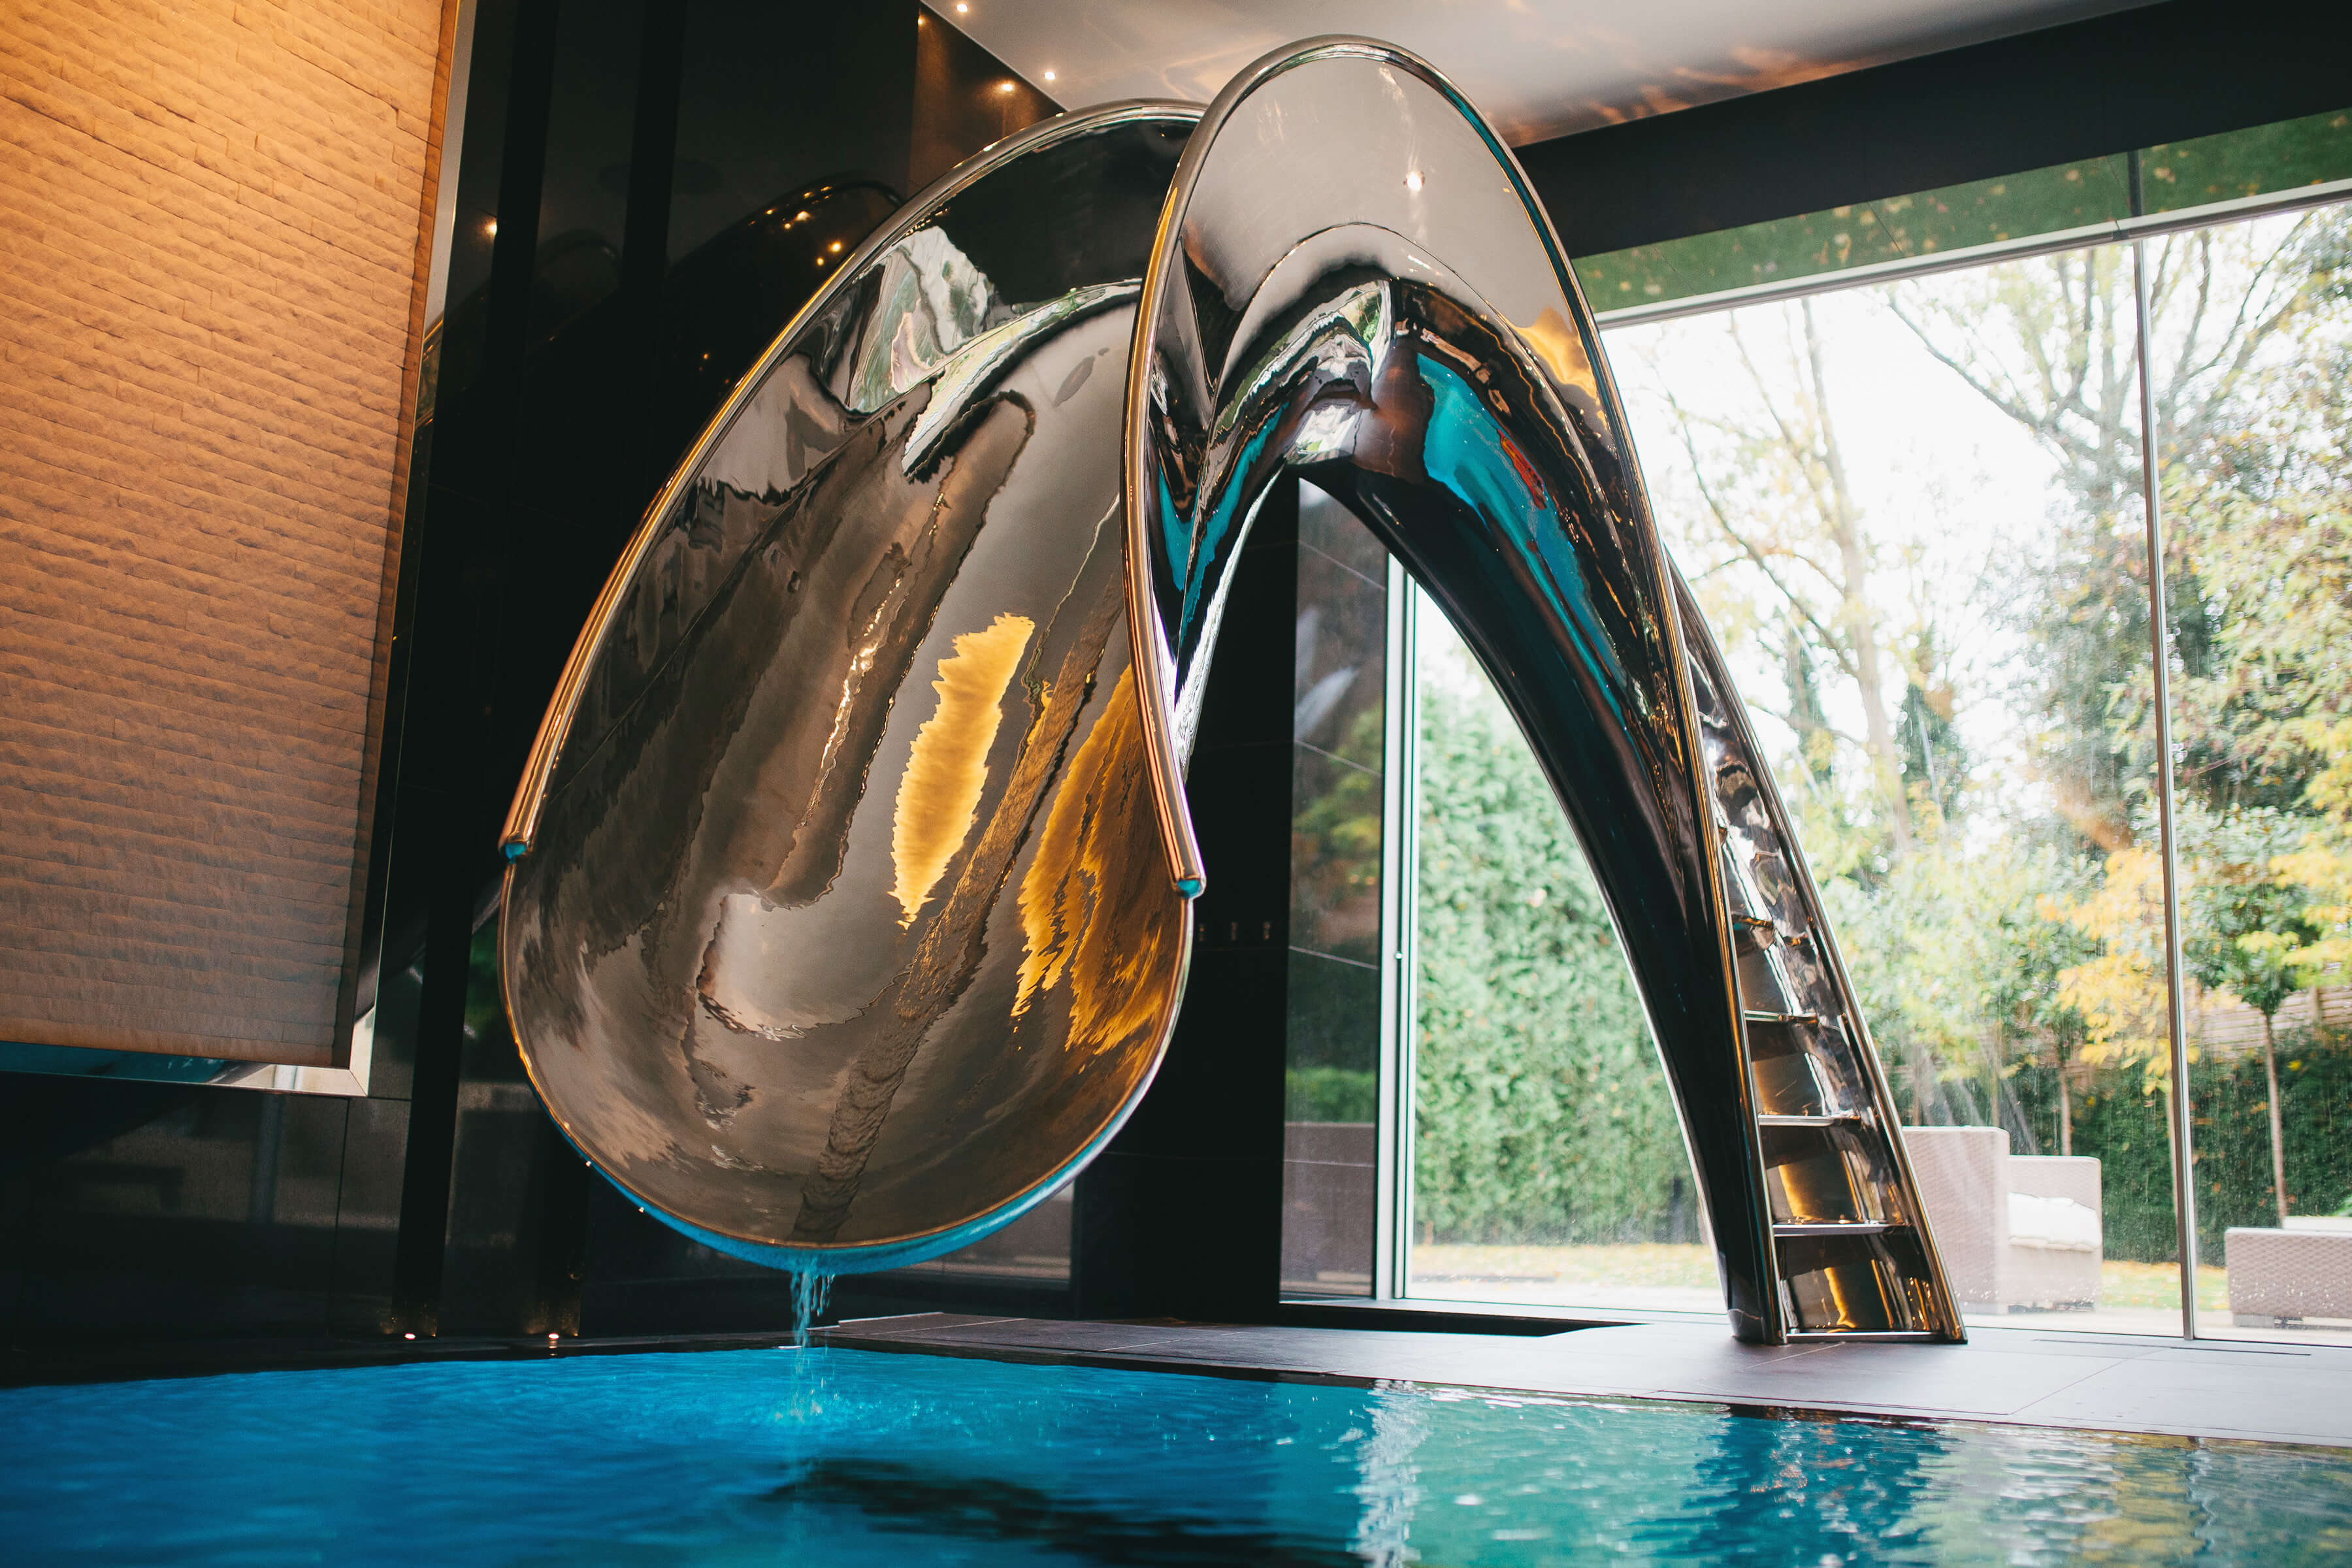 Mirror polished metal water slide for indoor residential swimming pool.